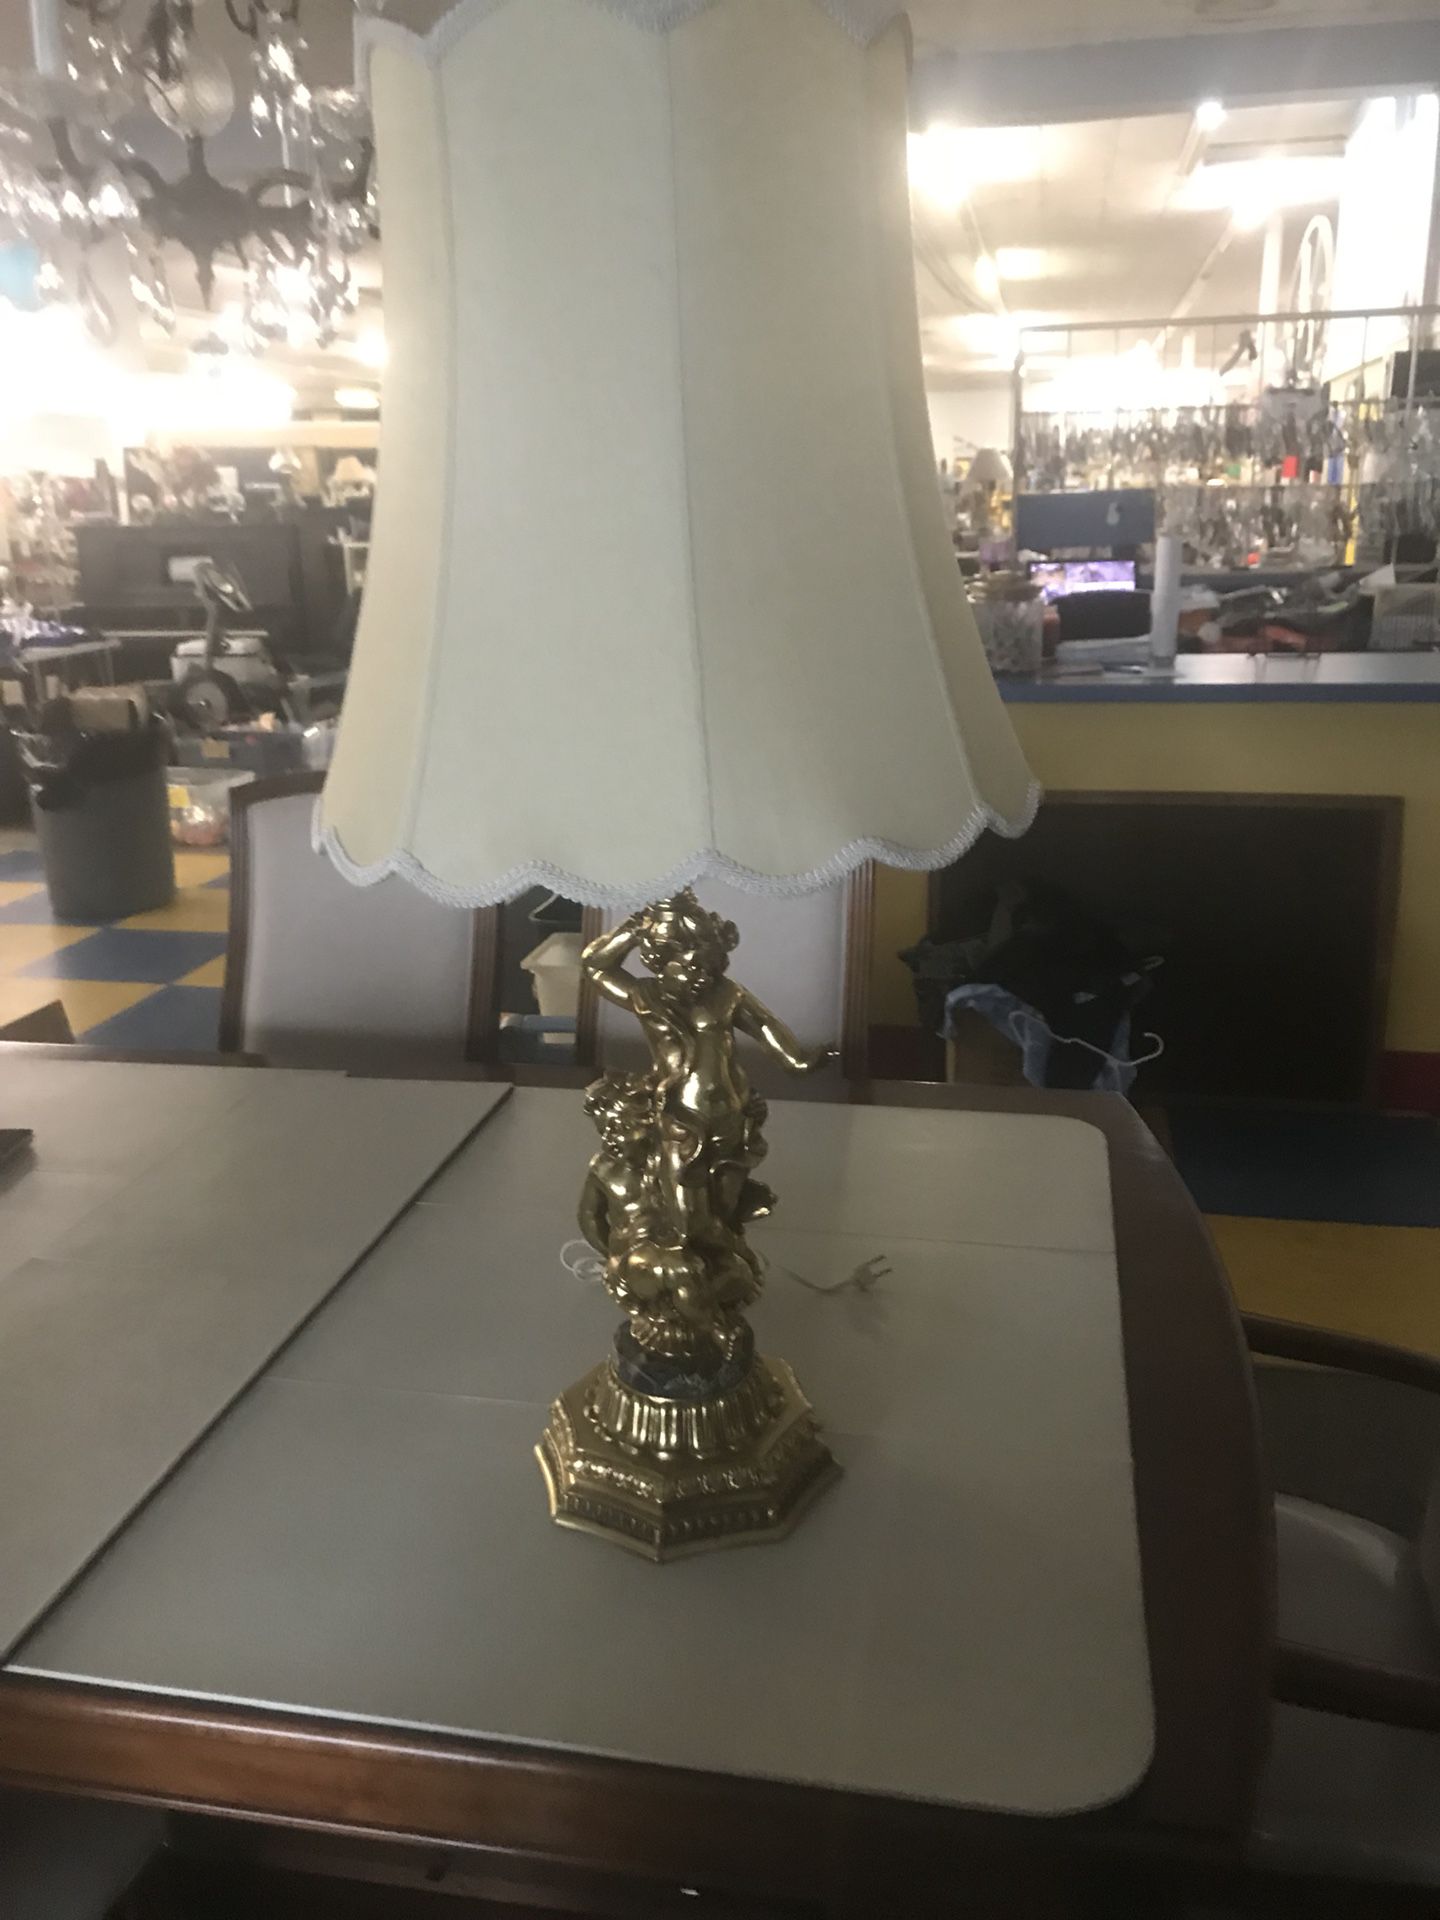 It is a Beautiful antique brass lamp with cherubs on it